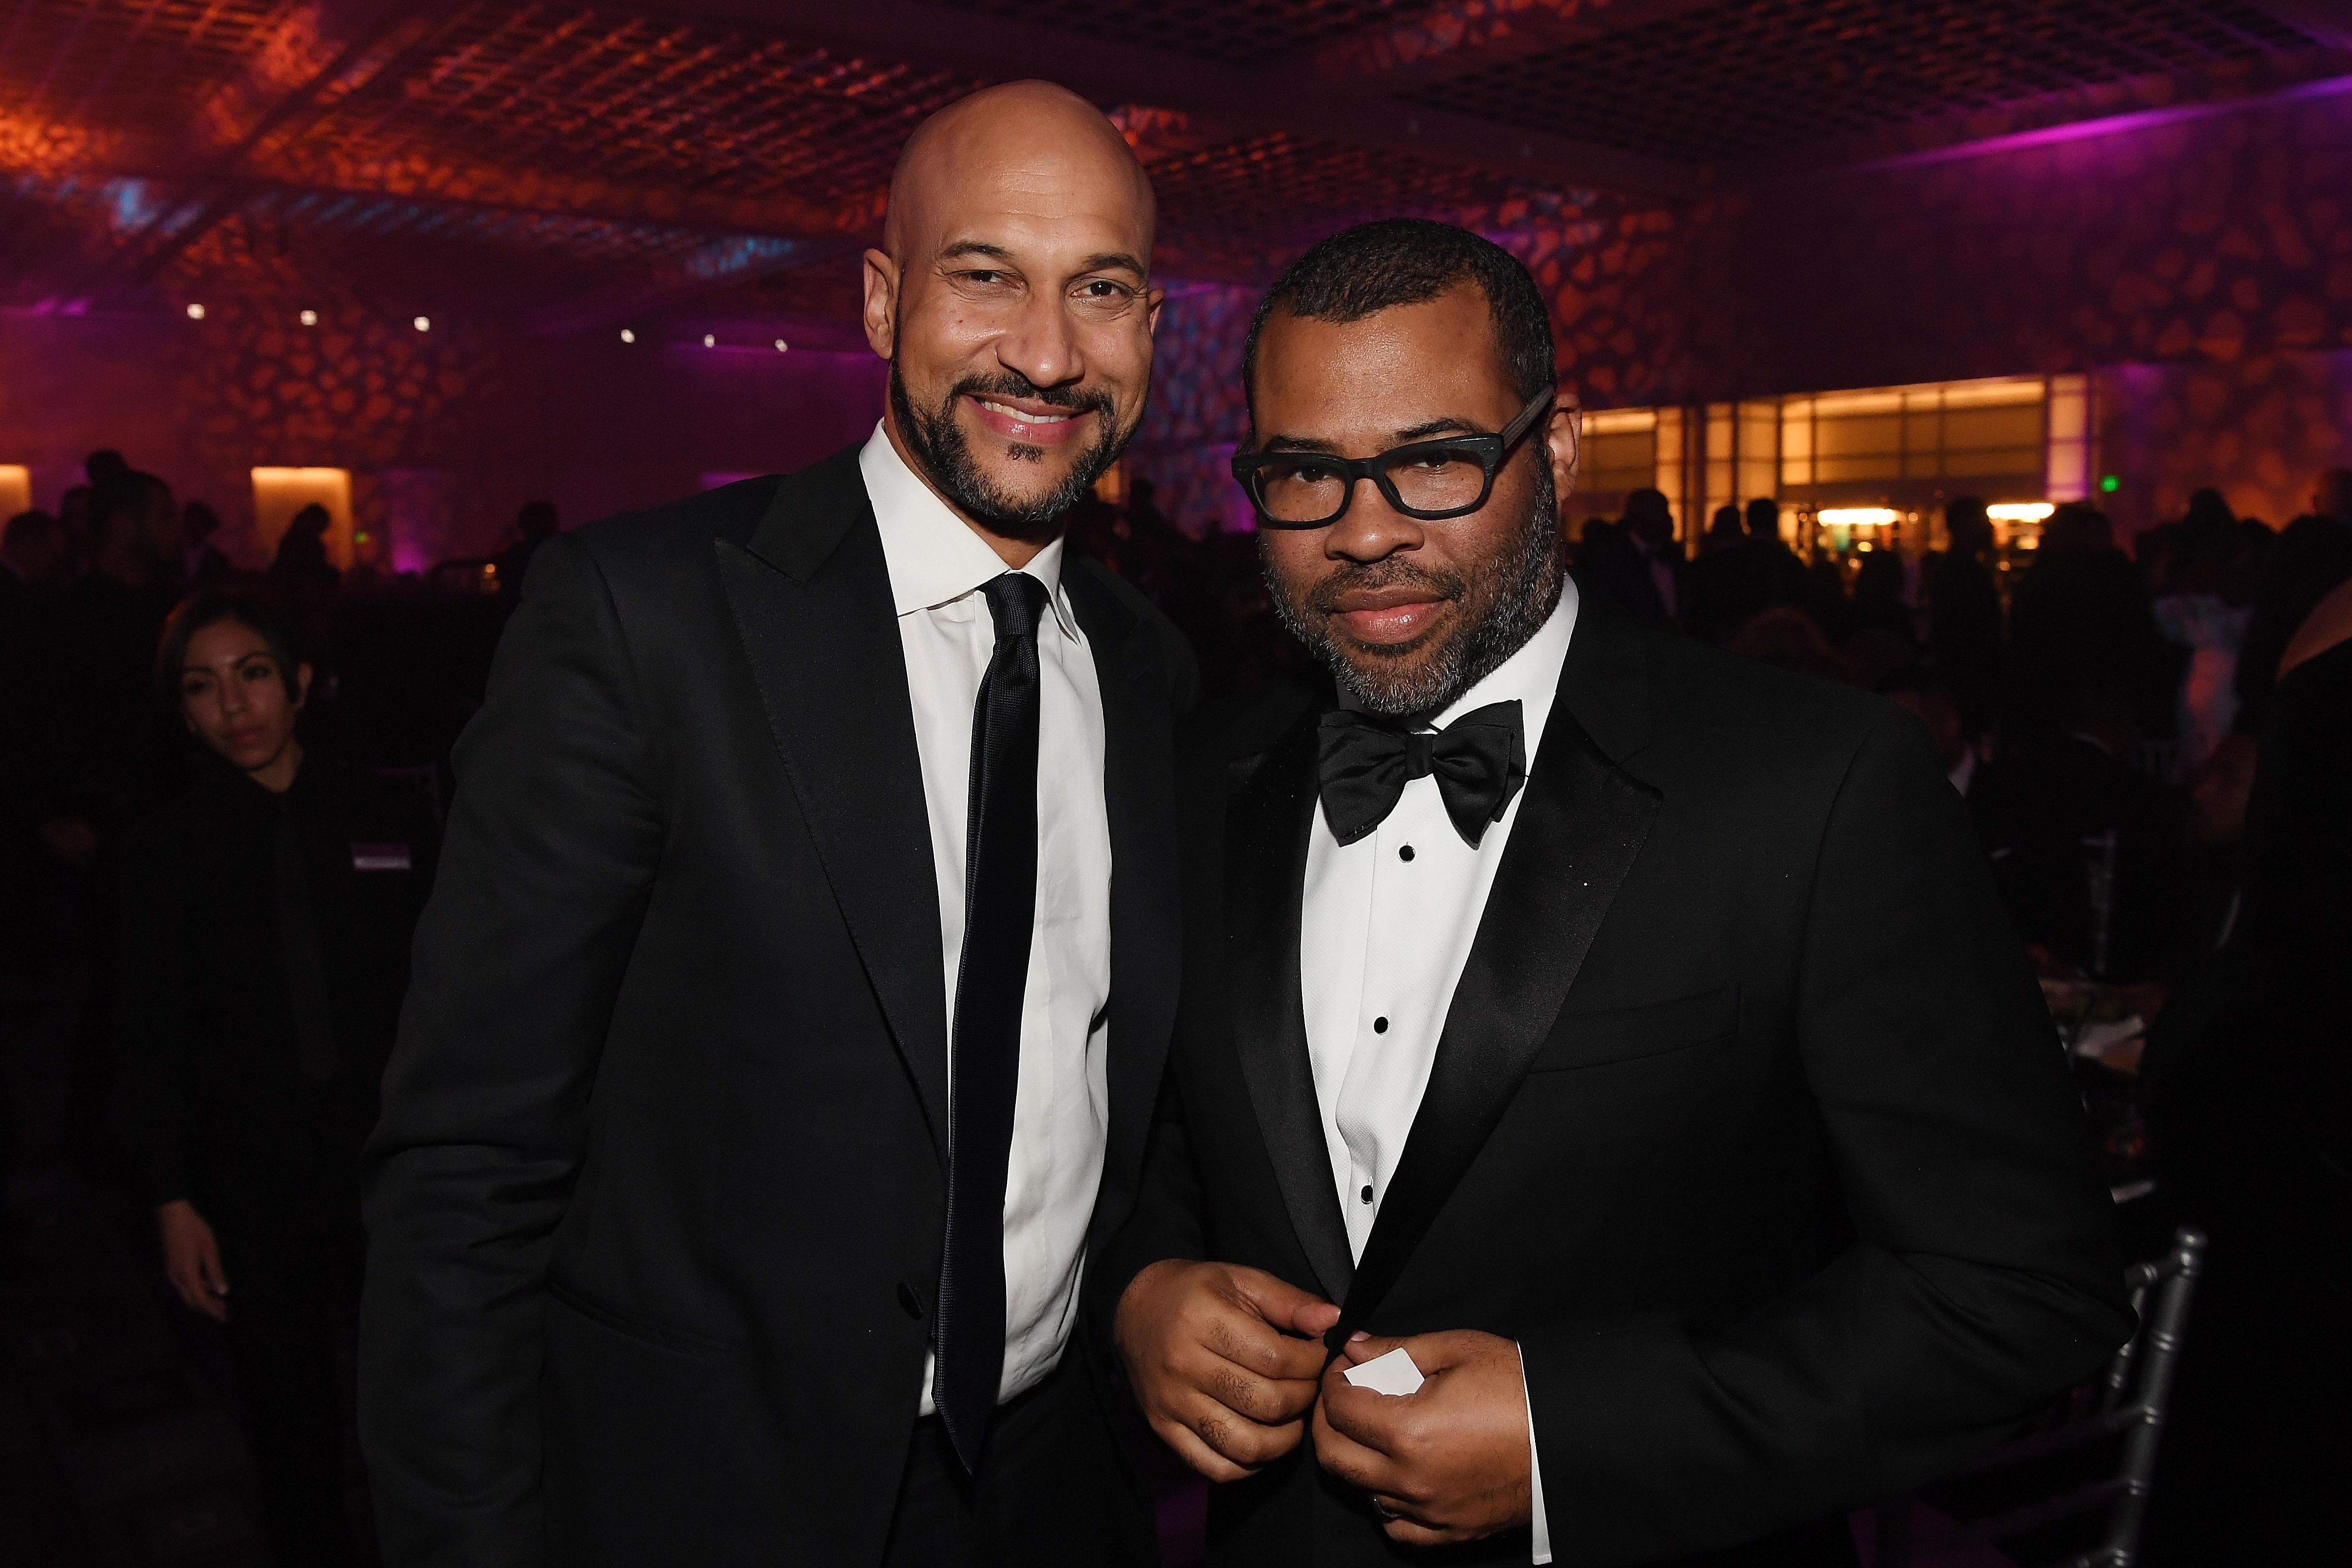 Keegan-Michael Key and Jordan Peele attend 49th NAACP Image Awards After Party at Pasadena Civic Auditorium on January 15, 2018 in Pasadena, California.  (Photo by Paras Griffin/Getty Images for NAACP)